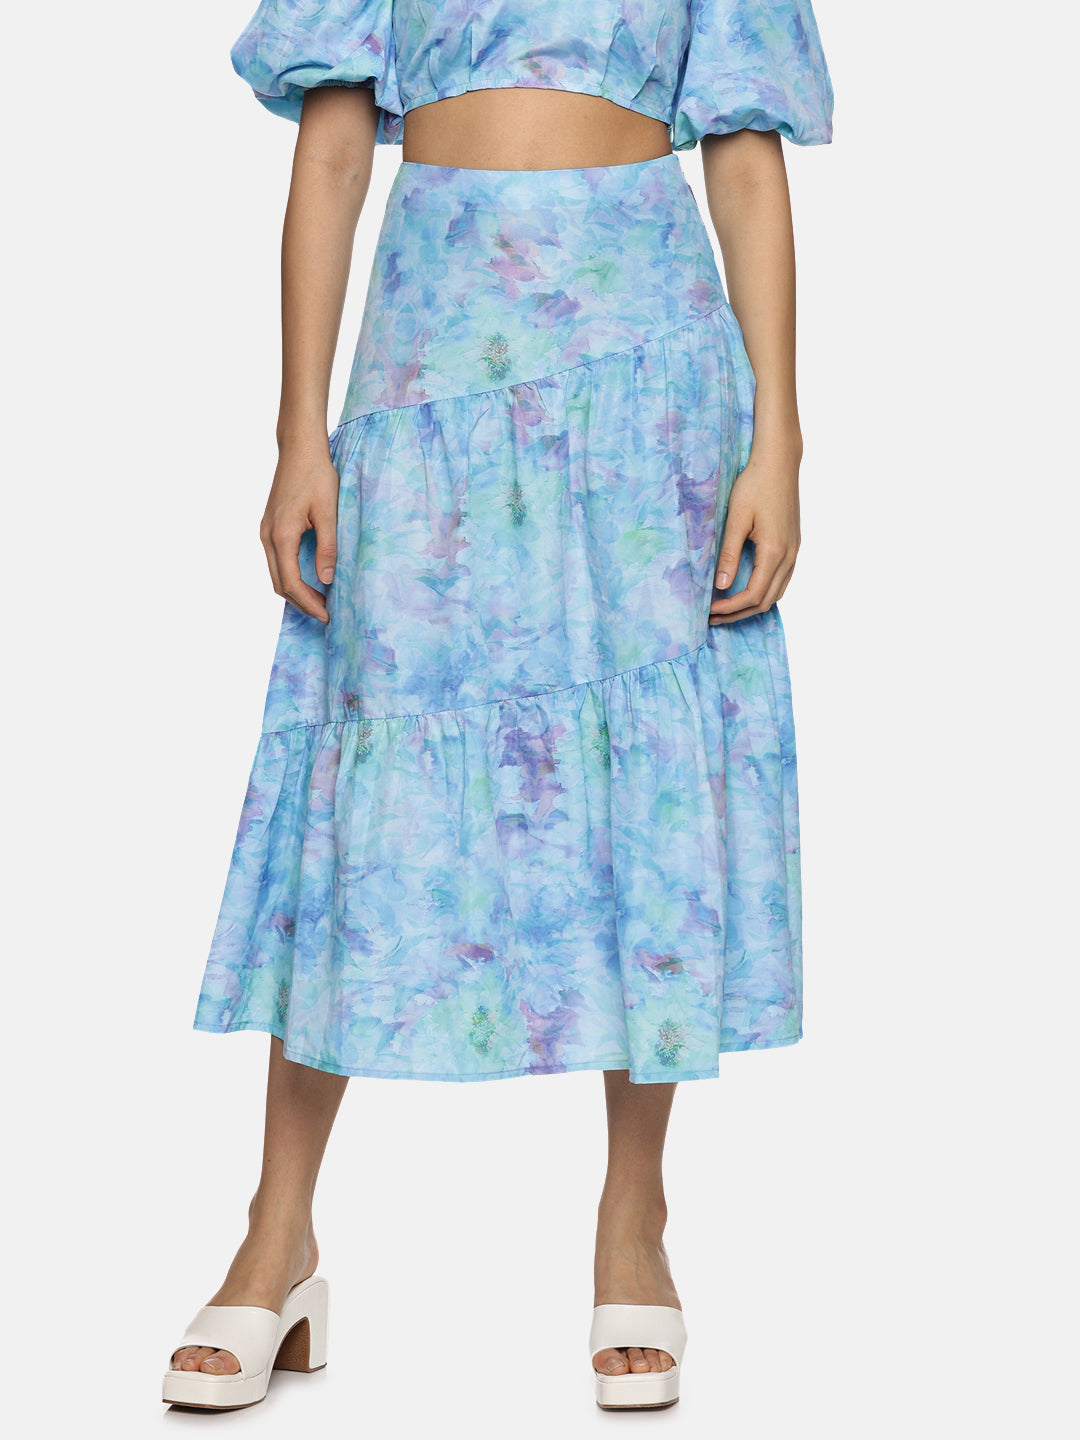 IS.U Floral Blue Cut And Sew Midaxi Skirt